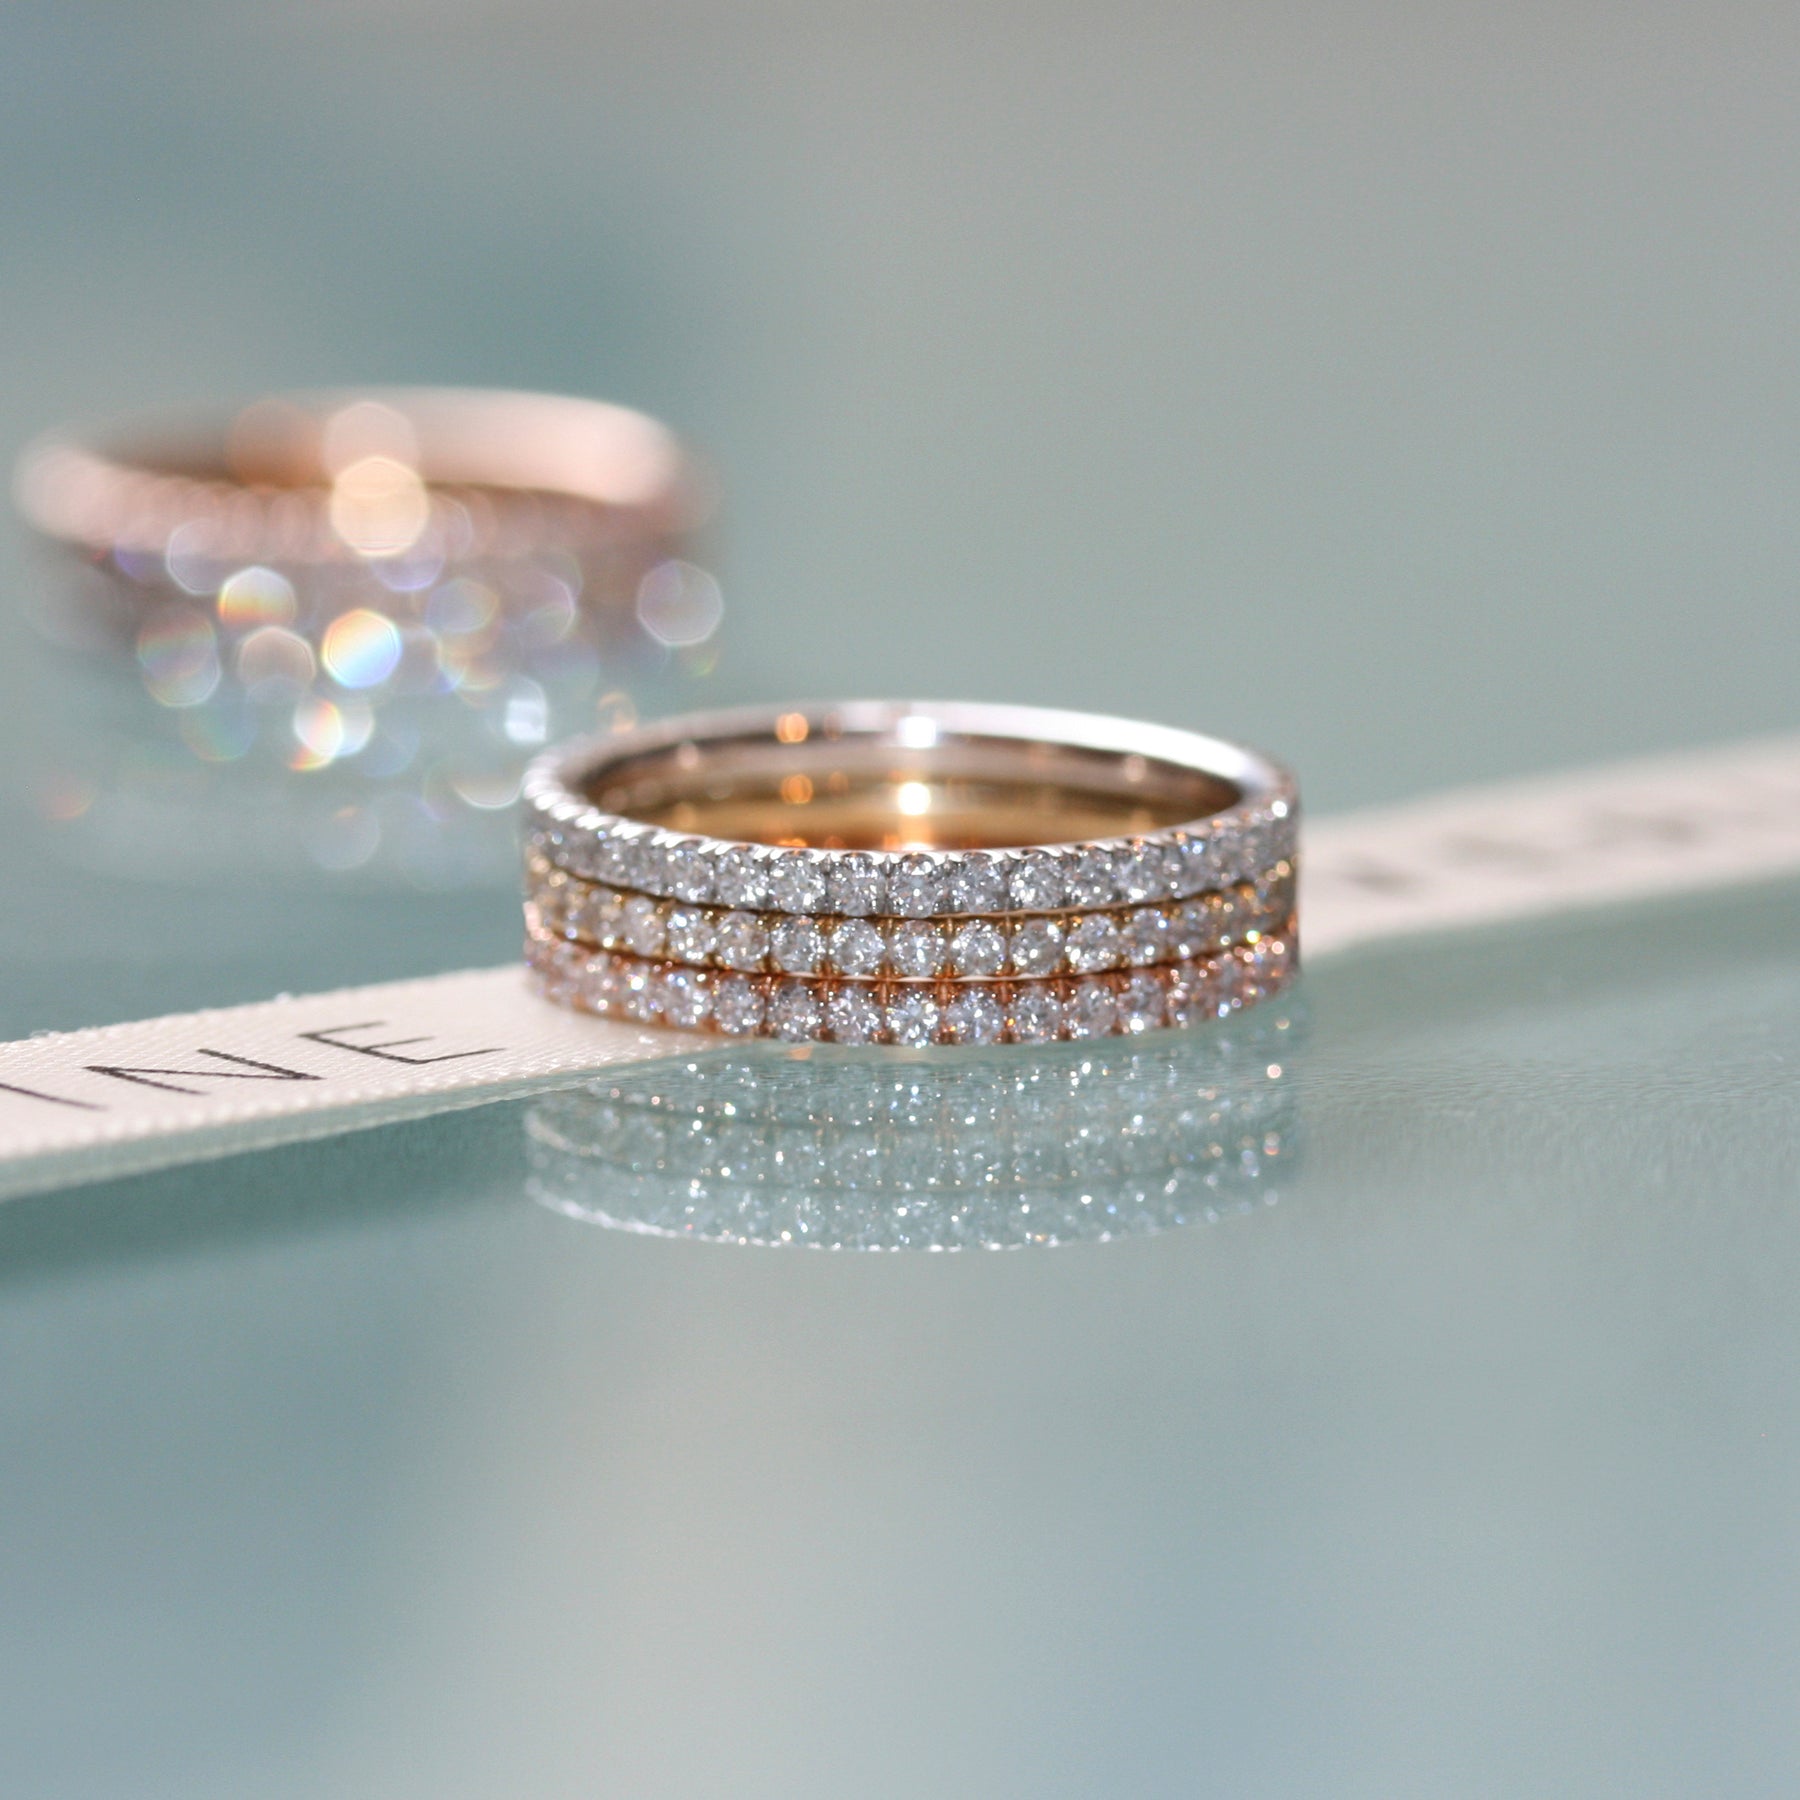 Diamond Trilogy eternity ring stack 18ct gold